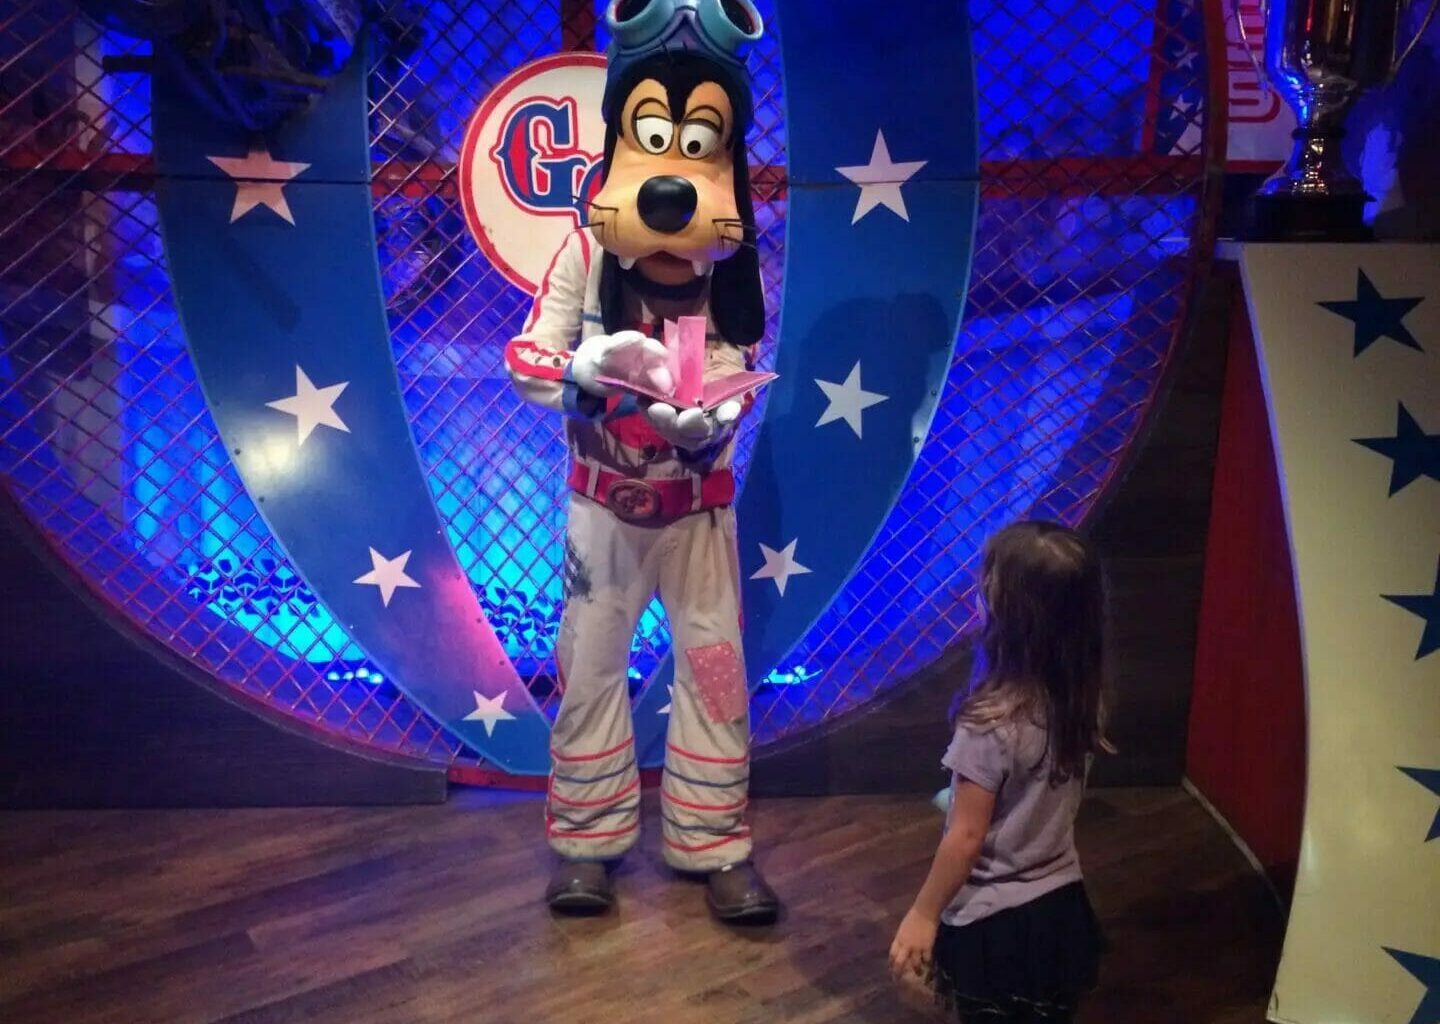 Ranking The Top Four Character Meet and Greets at Magic Kingdom-Vote For Your Favorite! 2